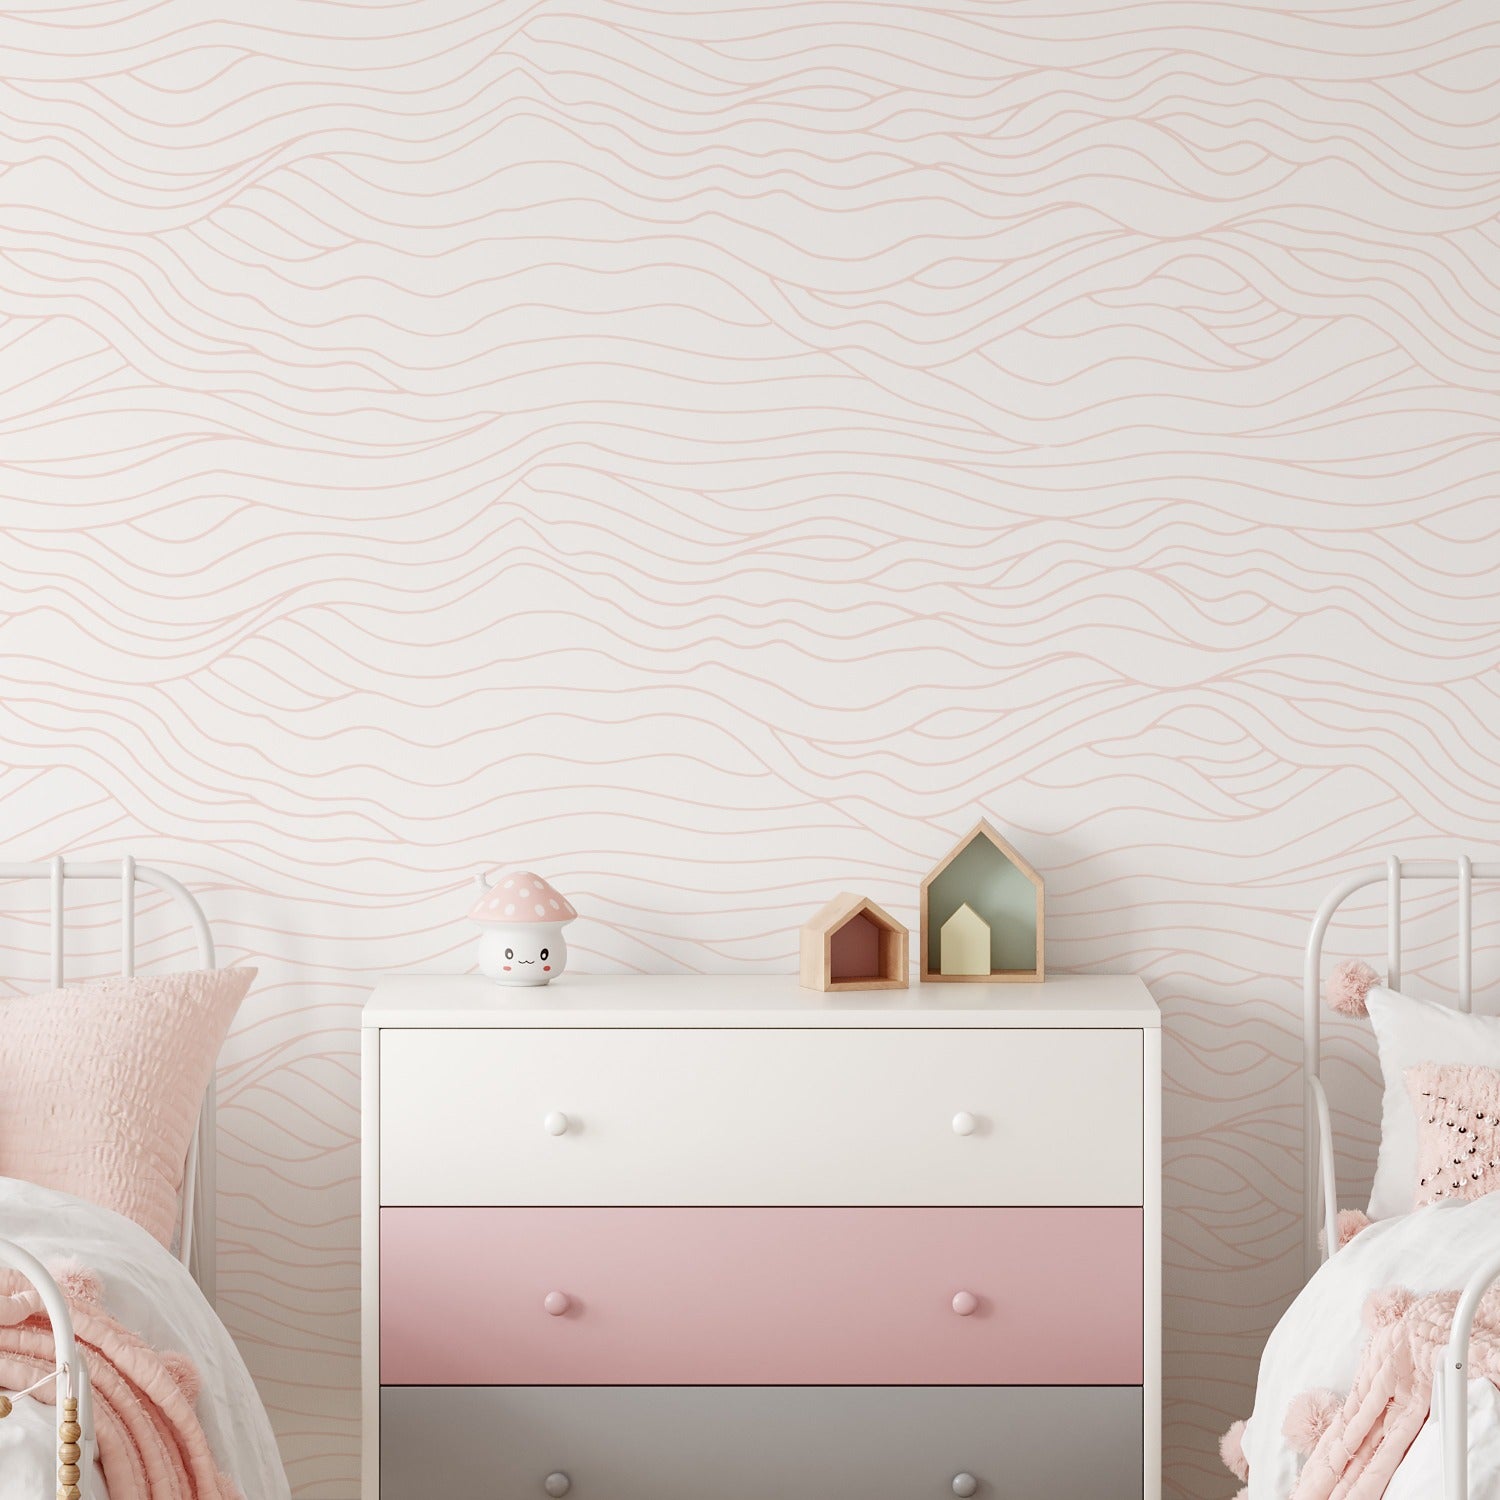 Image of a children's room corner featuring a pastel-hued Line Art Wave Wallpaper with soft wavy lines in a horizontal pattern on a light background. A white and pink dresser sits against the wallpaper with a cute toy mushroom, two small house-shaped shelves, and plush pillows adding to the room's whimsy.